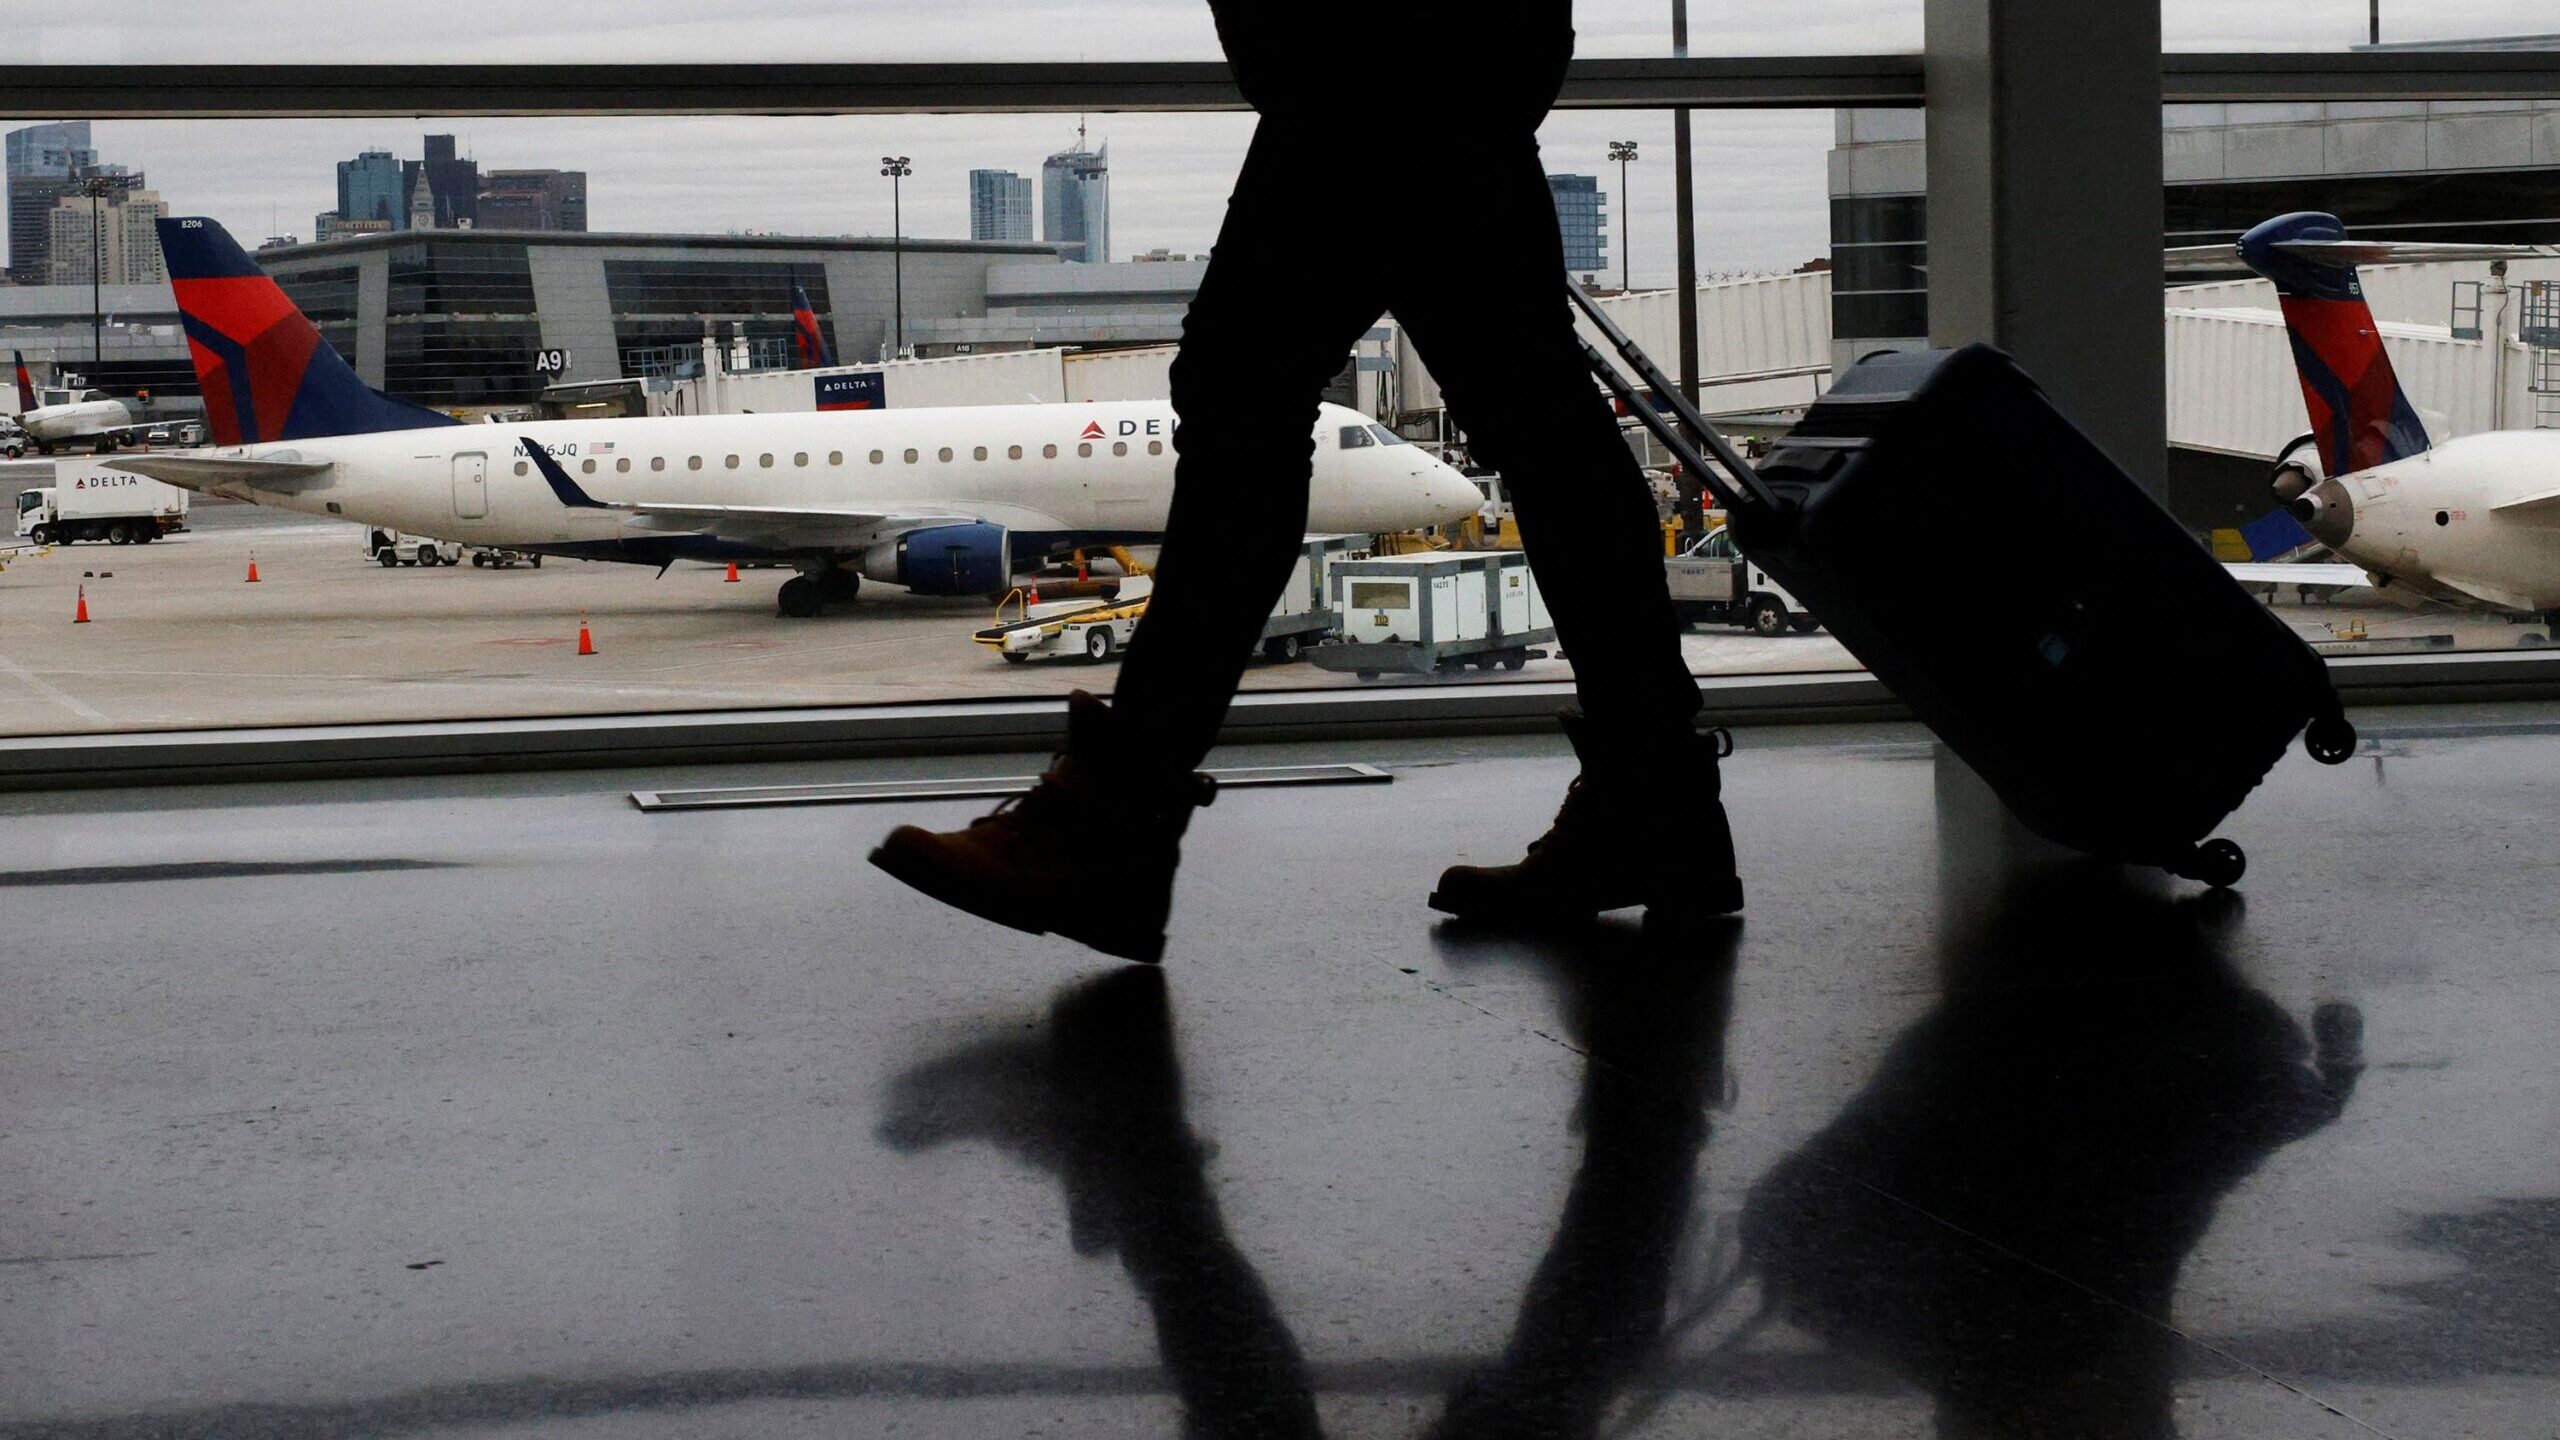 A passenger walks past a Delta Airlines plane at a gate at Logan International Airport in Boston, M...